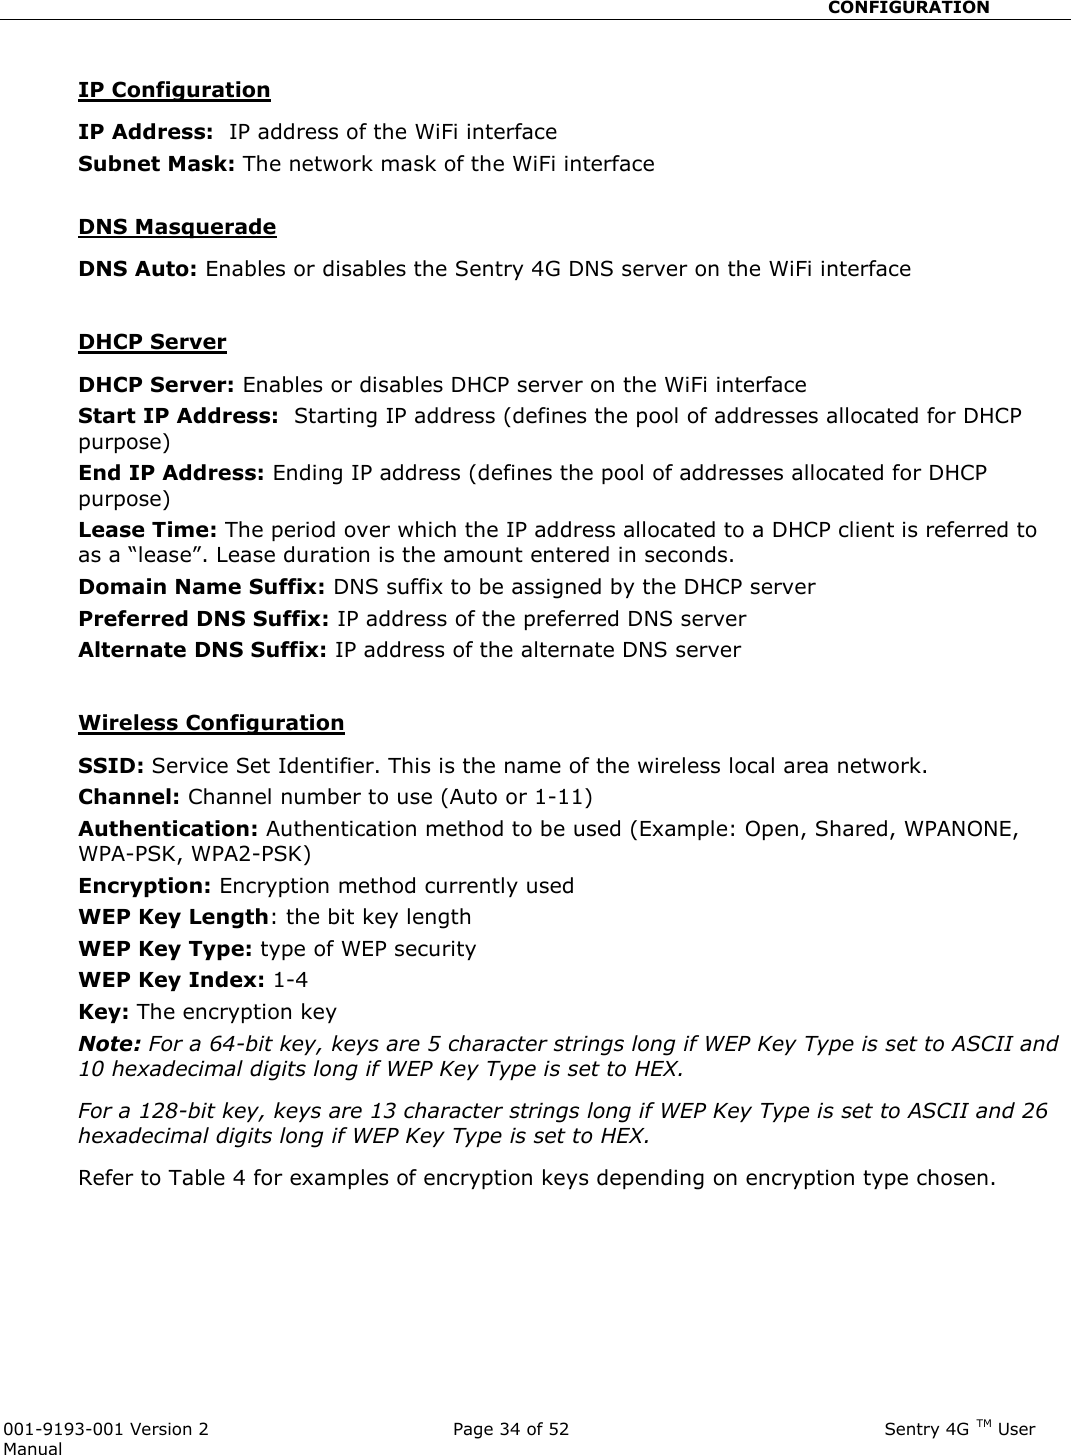                                                       CONFIGURATION  001-9193-001 Version 2              Page 34 of 52                              Sentry 4G TM User Manual  IP Configuration IP Address:  IP address of the WiFi interface Subnet Mask: The network mask of the WiFi interface  DNS Masquerade DNS Auto: Enables or disables the Sentry 4G DNS server on the WiFi interface  DHCP Server DHCP Server: Enables or disables DHCP server on the WiFi interface Start IP Address:  Starting IP address (defines the pool of addresses allocated for DHCP purpose) End IP Address: Ending IP address (defines the pool of addresses allocated for DHCP purpose) Lease Time: The period over which the IP address allocated to a DHCP client is referred to as a “lease”. Lease duration is the amount entered in seconds. Domain Name Suffix: DNS suffix to be assigned by the DHCP server Preferred DNS Suffix: IP address of the preferred DNS server Alternate DNS Suffix: IP address of the alternate DNS server   Wireless Configuration SSID: Service Set Identifier. This is the name of the wireless local area network. Channel: Channel number to use (Auto or 1-11) Authentication: Authentication method to be used (Example: Open, Shared, WPANONE, WPA-PSK, WPA2-PSK) Encryption: Encryption method currently used  WEP Key Length: the bit key length WEP Key Type: type of WEP security WEP Key Index: 1-4 Key: The encryption key Note: For a 64-bit key, keys are 5 character strings long if WEP Key Type is set to ASCII and 10 hexadecimal digits long if WEP Key Type is set to HEX. For a 128-bit key, keys are 13 character strings long if WEP Key Type is set to ASCII and 26 hexadecimal digits long if WEP Key Type is set to HEX. Refer to Table 4 for examples of encryption keys depending on encryption type chosen. 